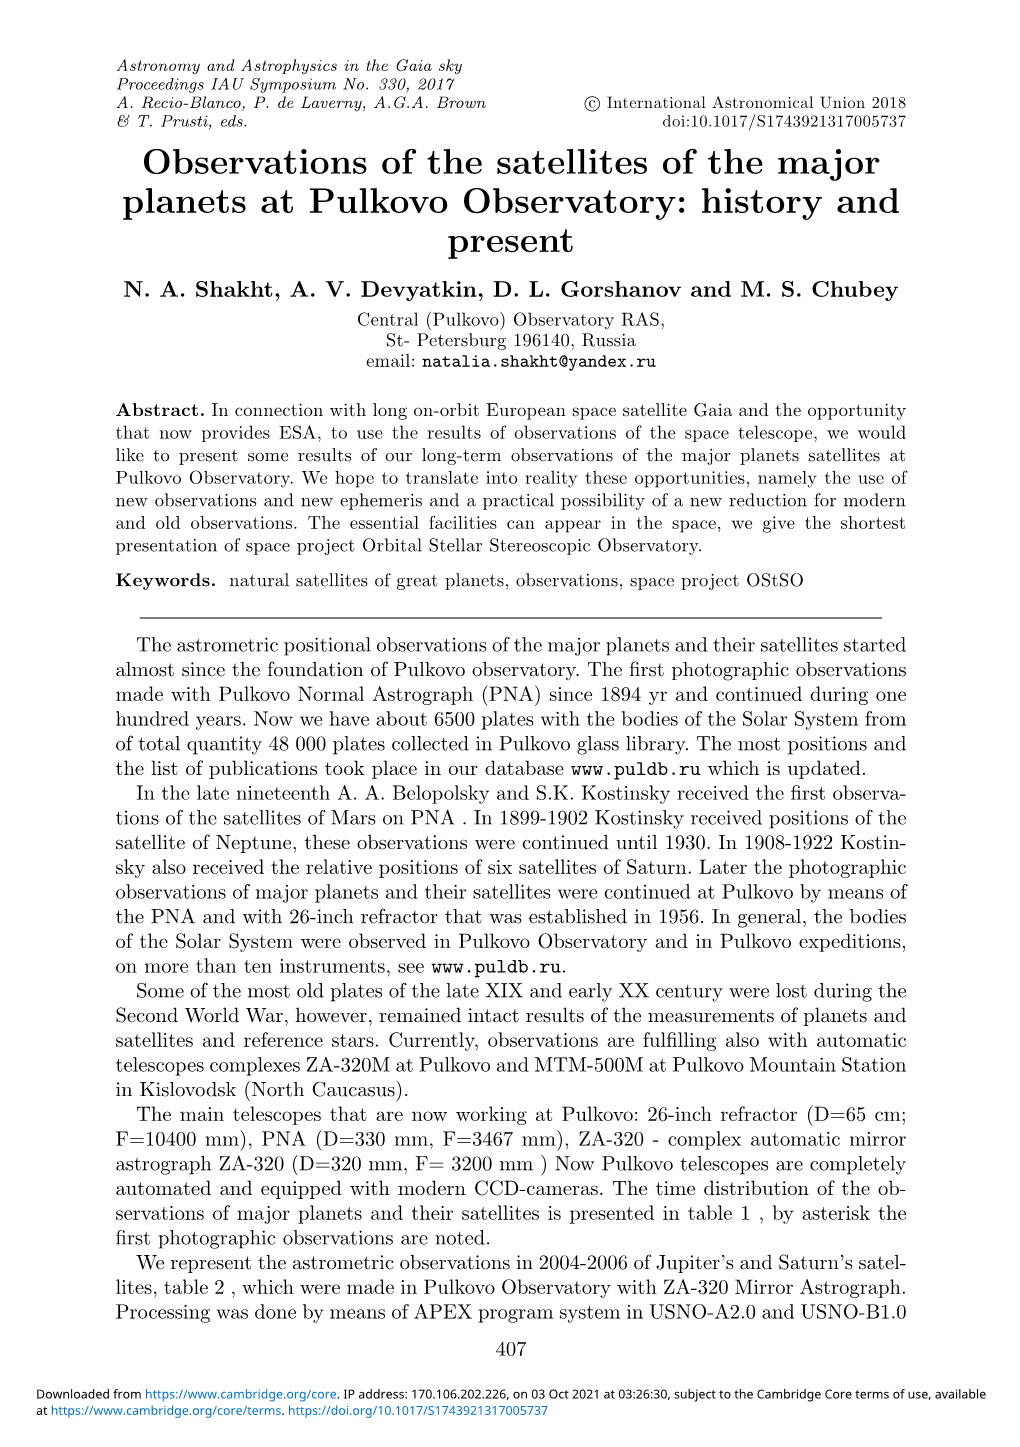 Observations of the Satellites of the Major Planets at Pulkovo Observatory: History and Present N